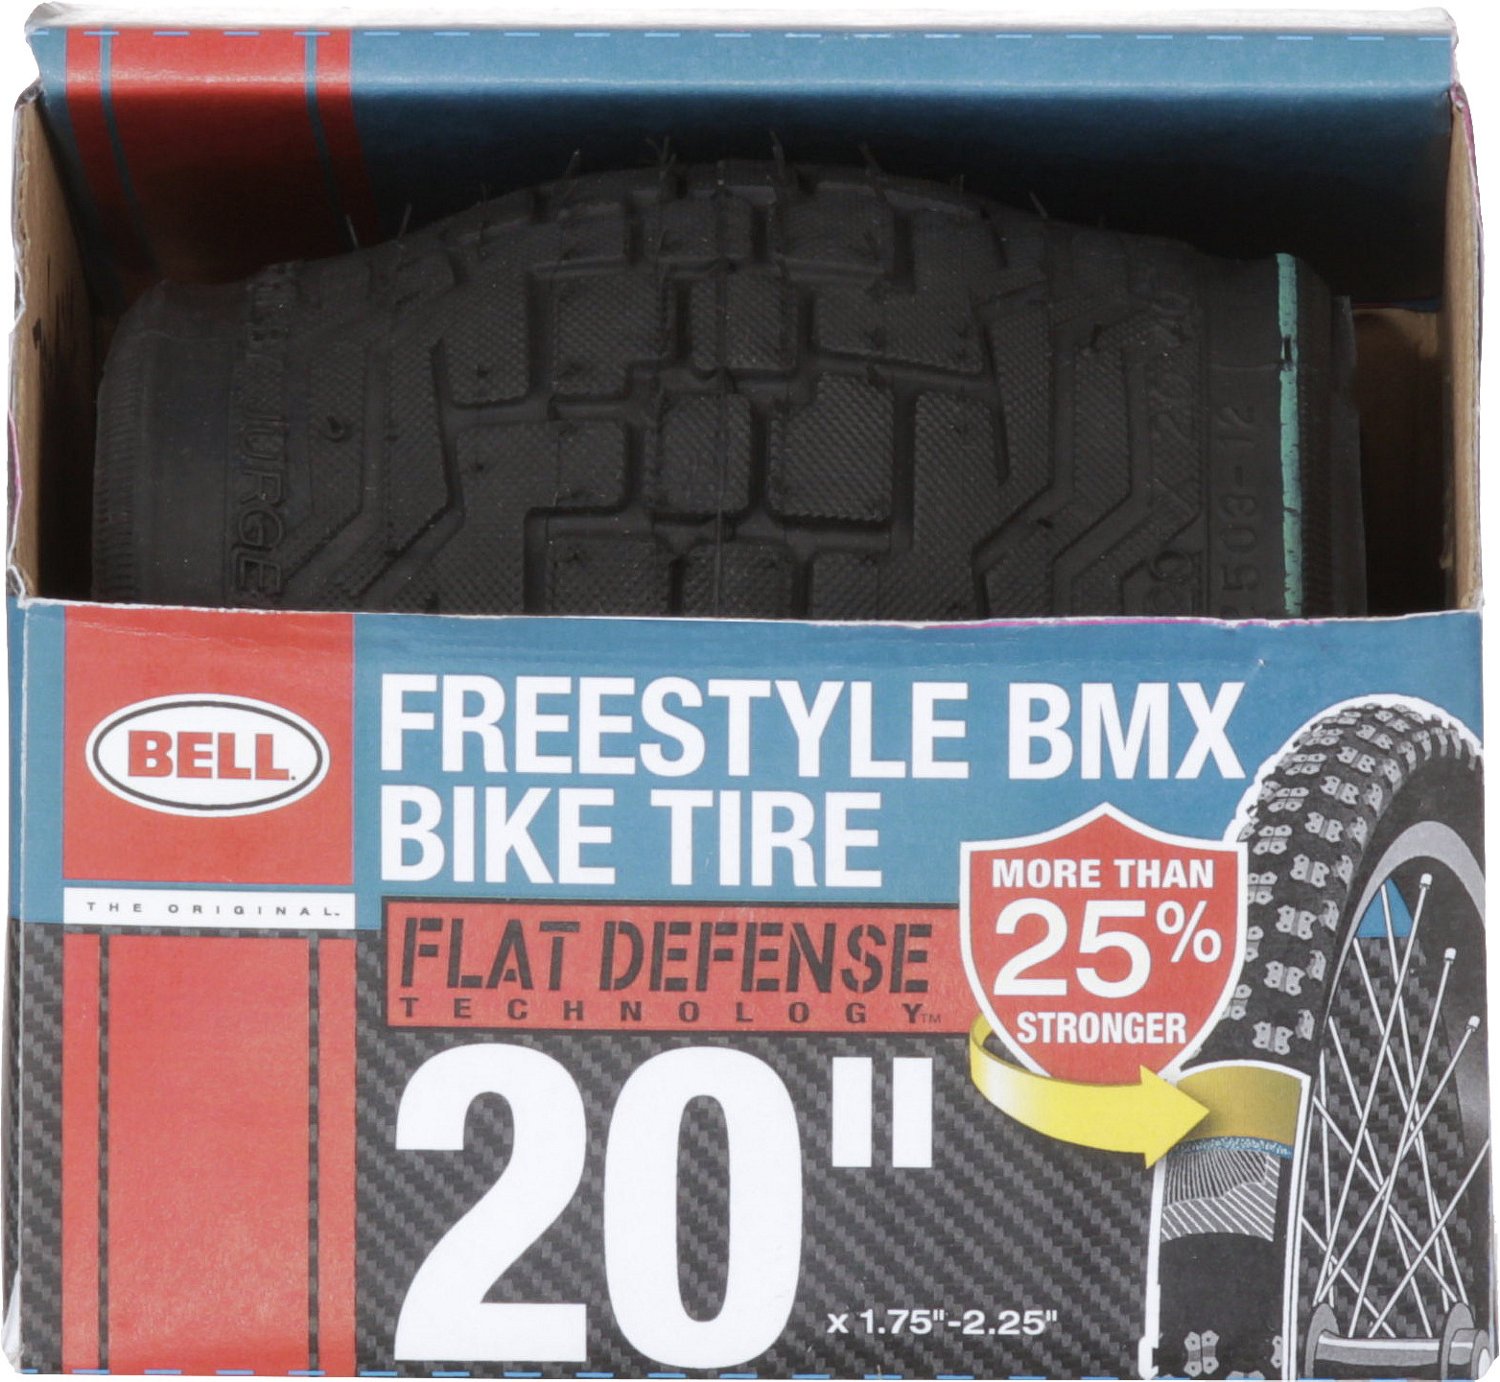 20 In 7115510 for sale online x 1.75-2.25 In. Black Bell Air Guard Freestyle BMX Bike Tire 